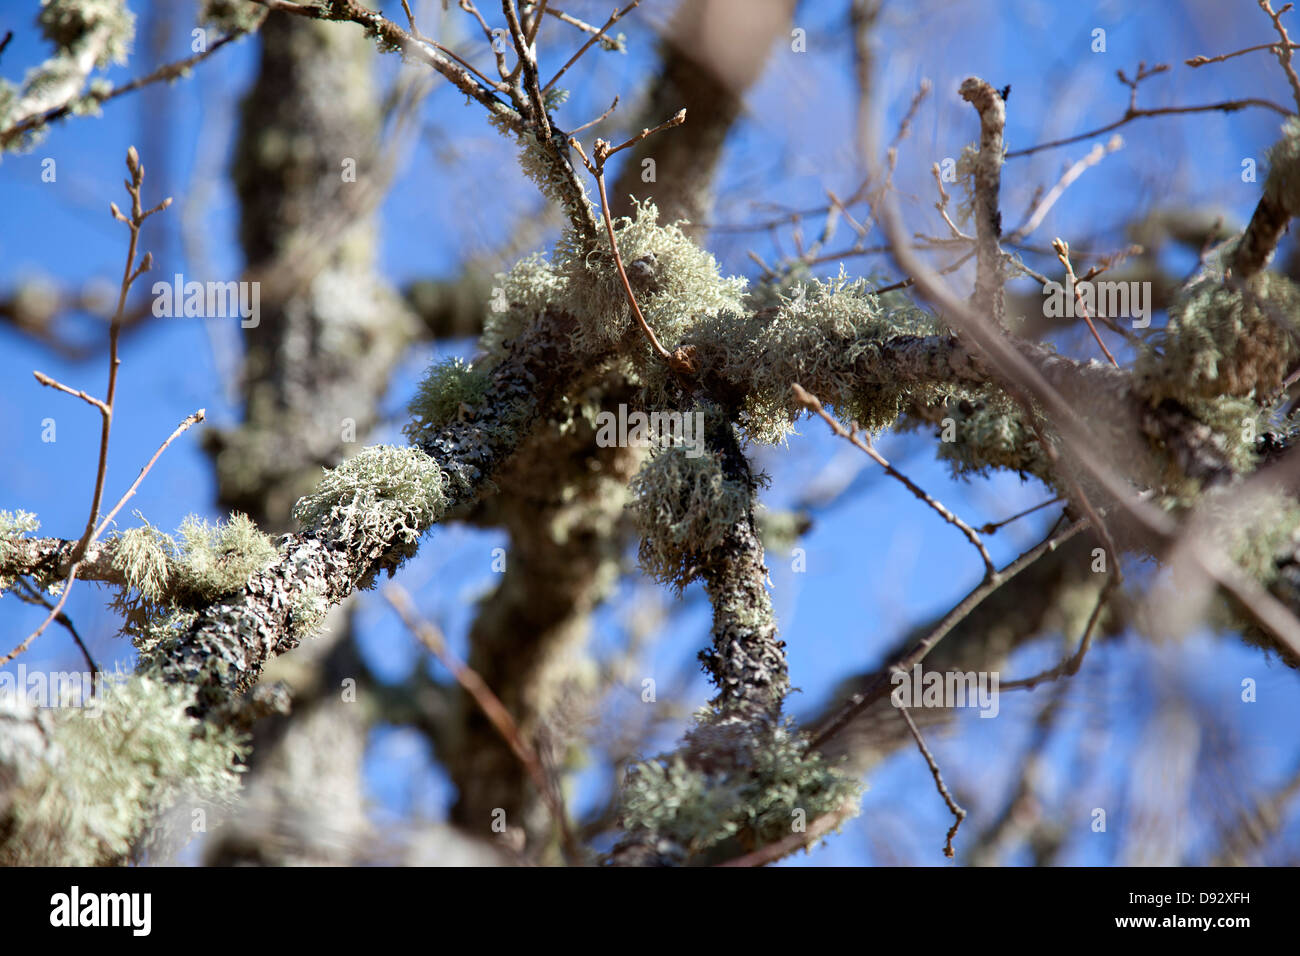 Moss growing on the branches of a tree Stock Photo